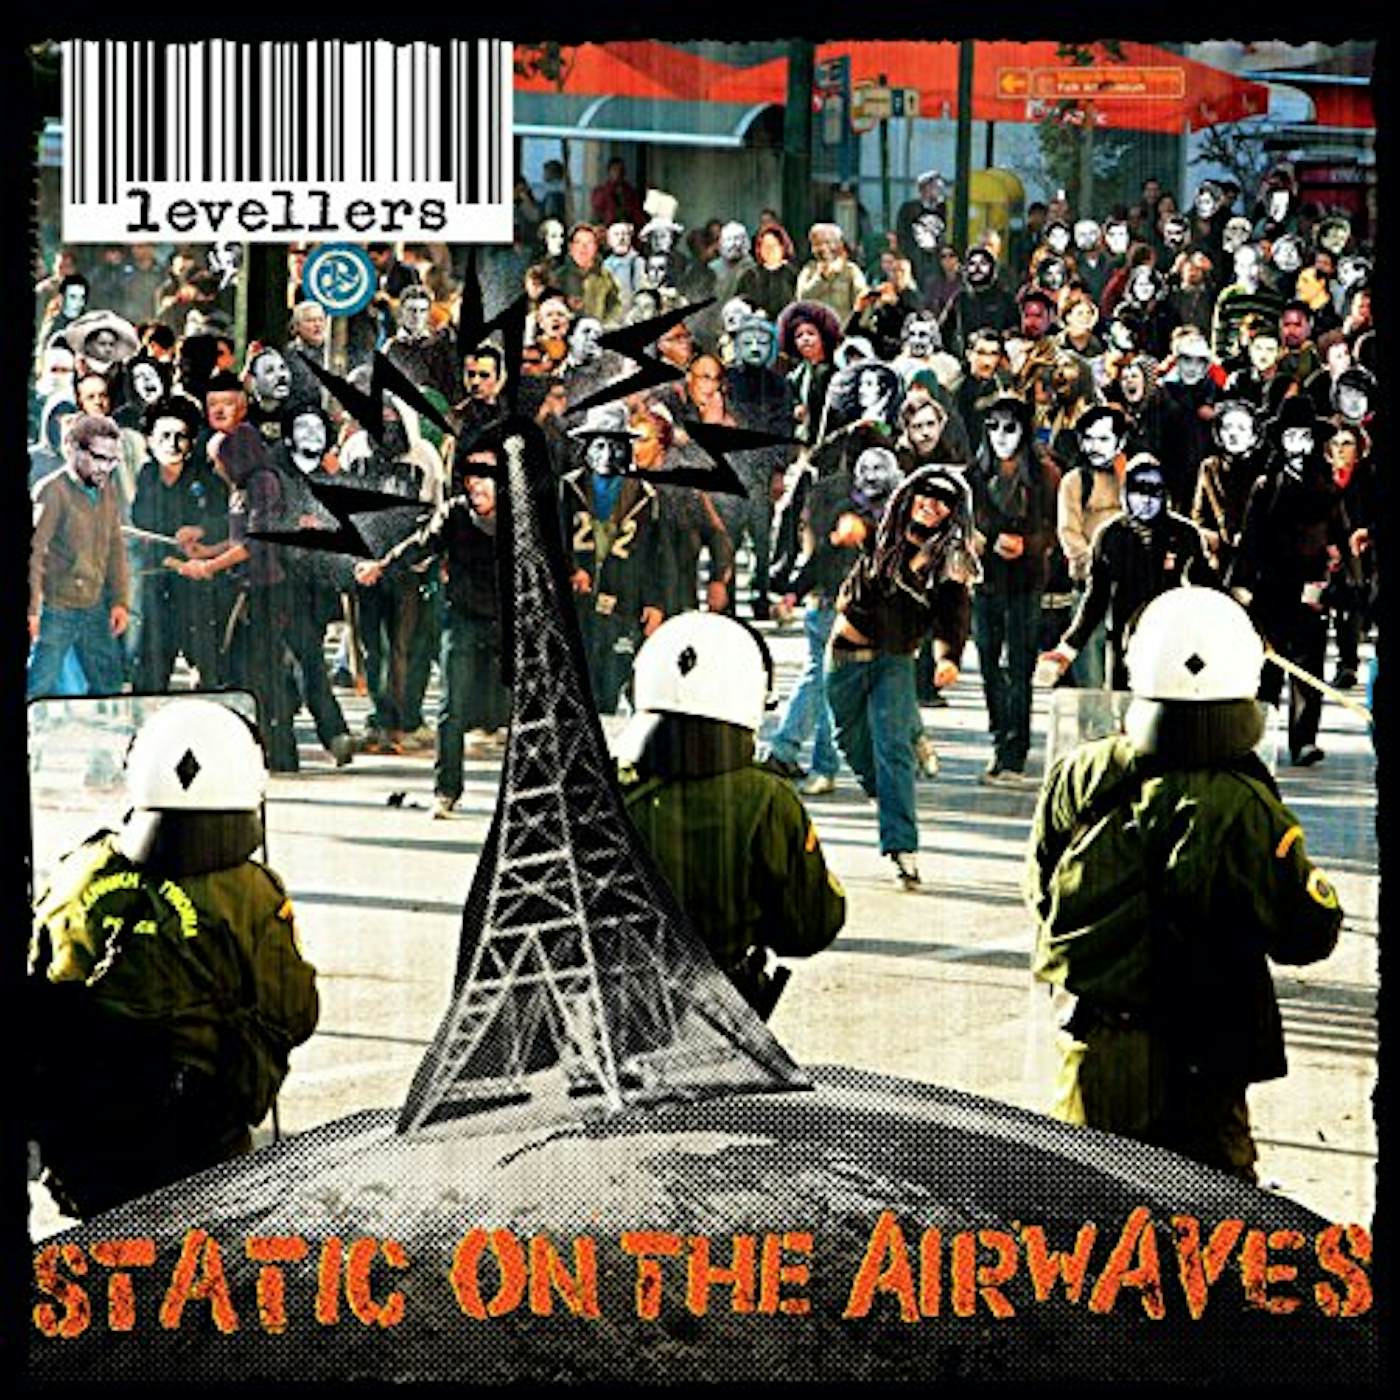 Levellers STATIC ON THE AIRWAVES: DELUXE 2CD+DVD EDITION CD